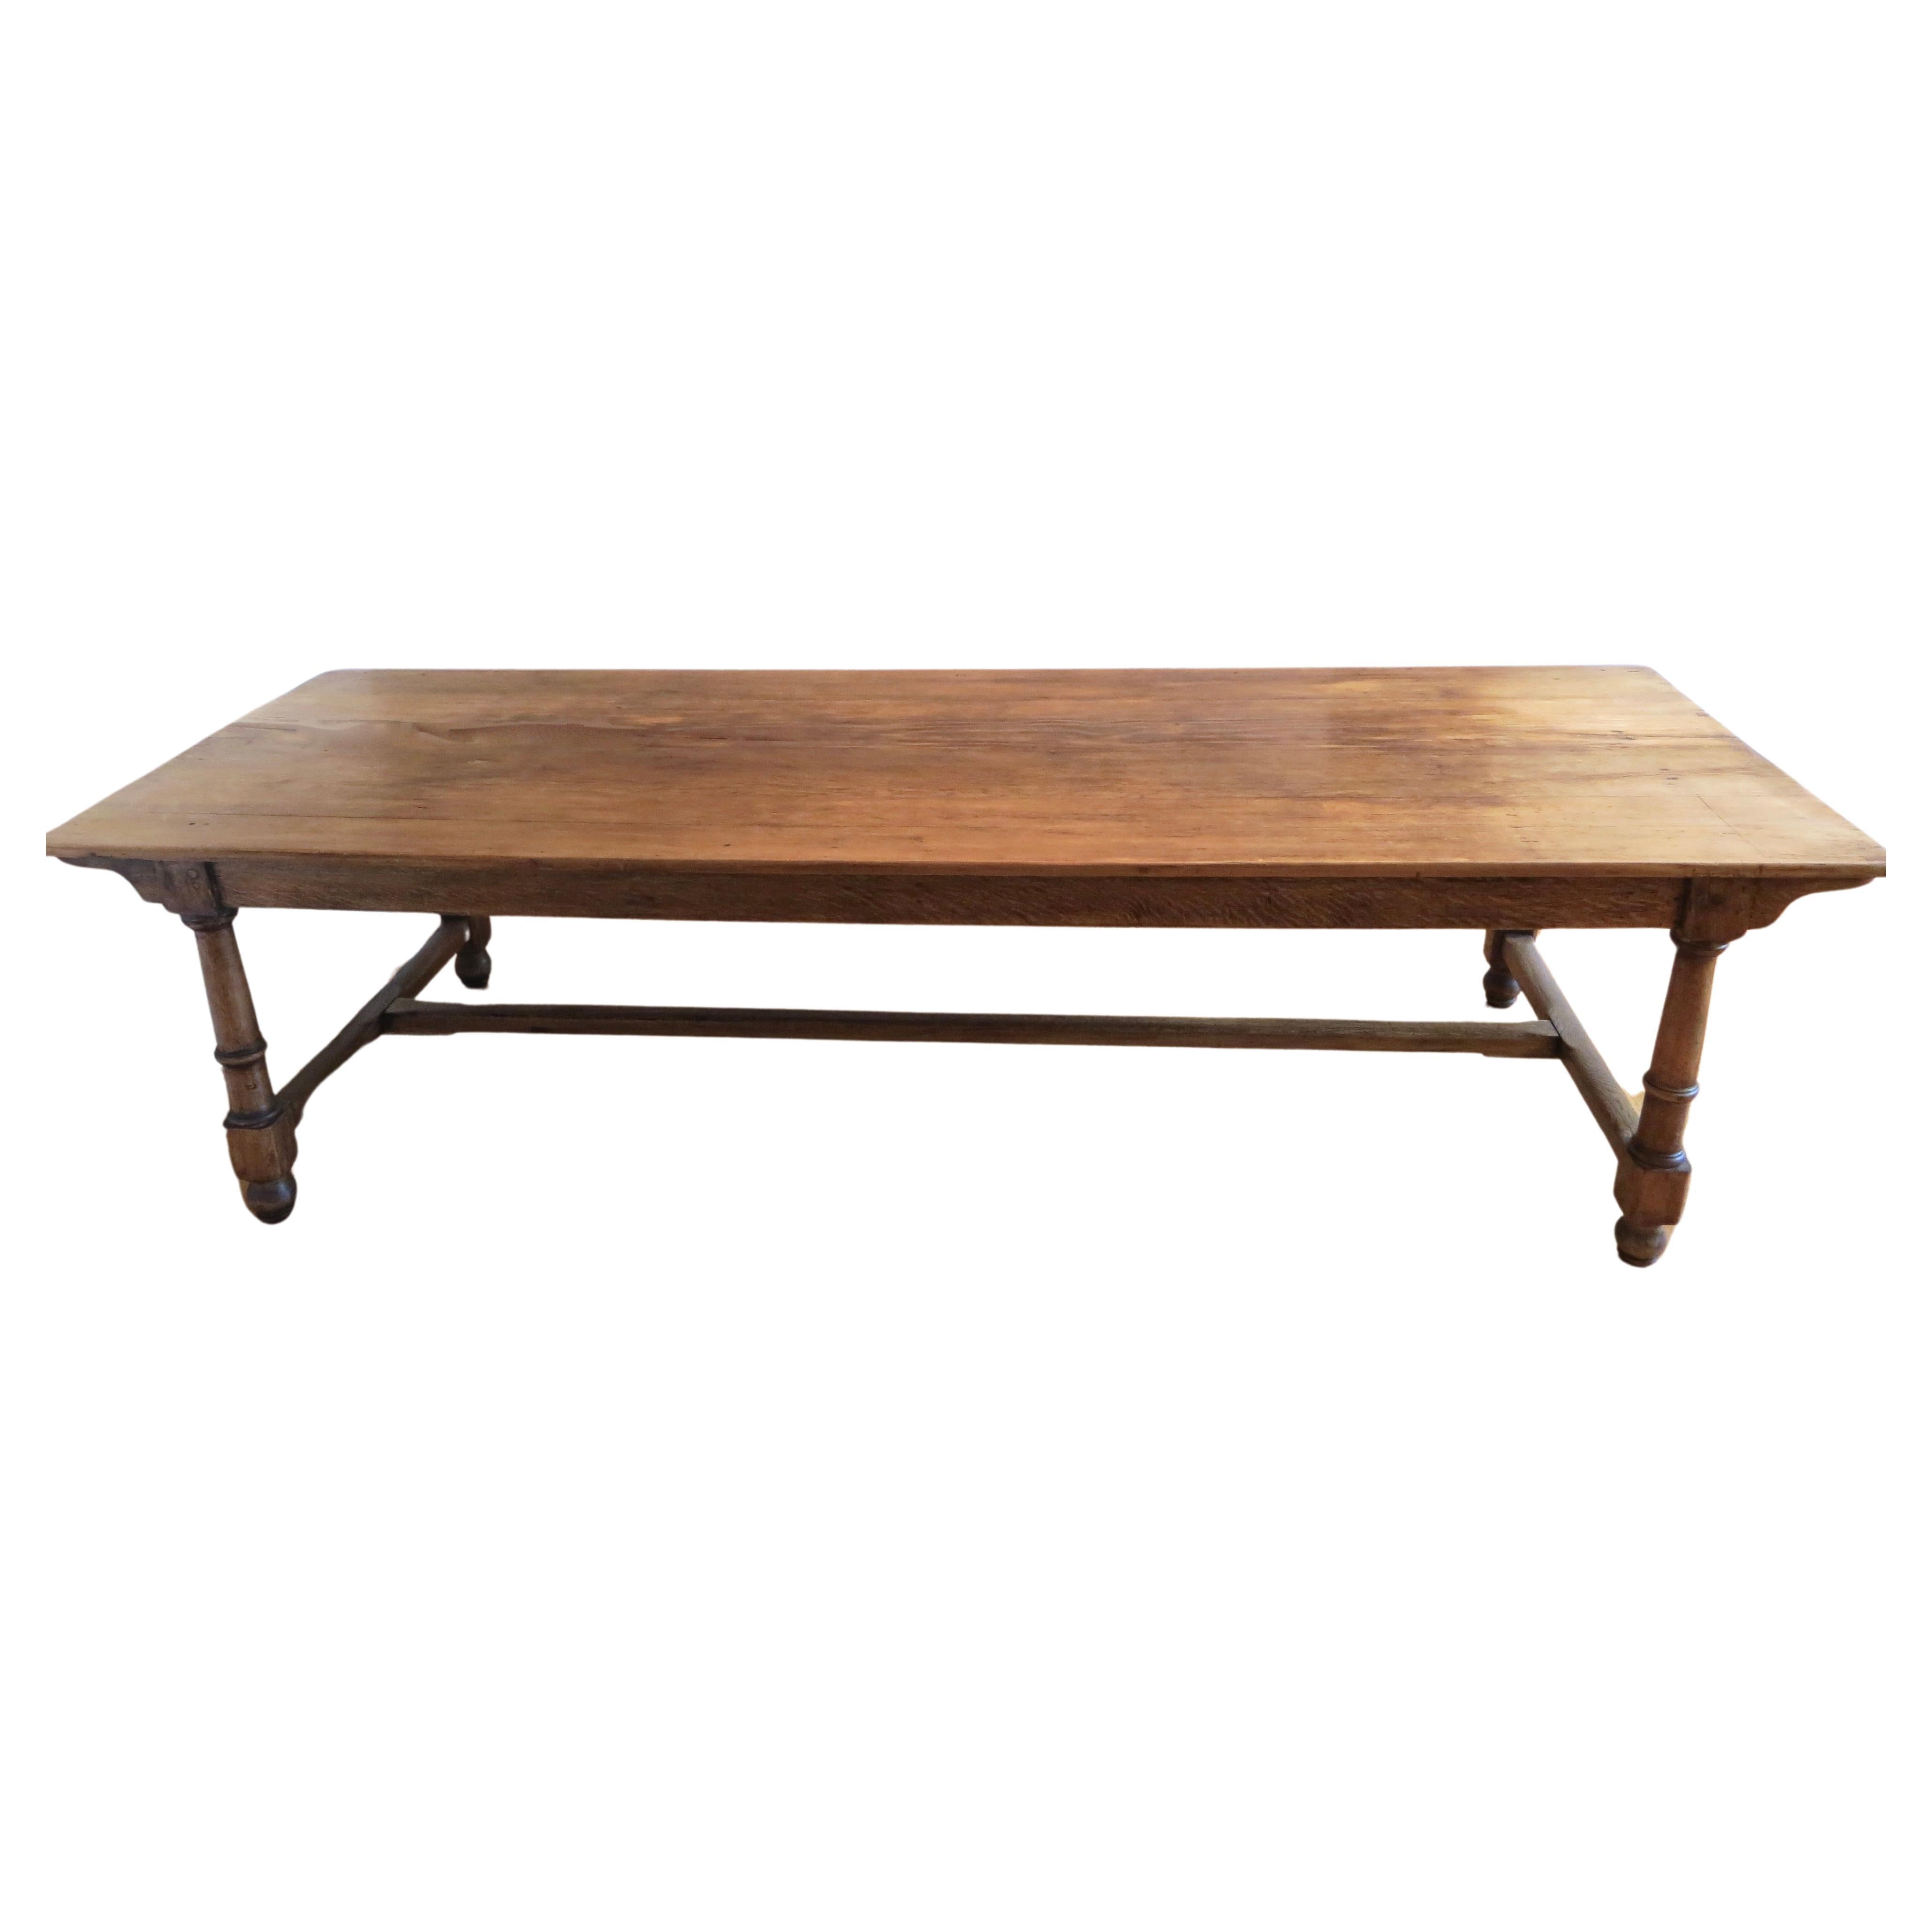 18th C. Large Provincial Plank Topped Dining Room Table. British Circa 1790 For Sale